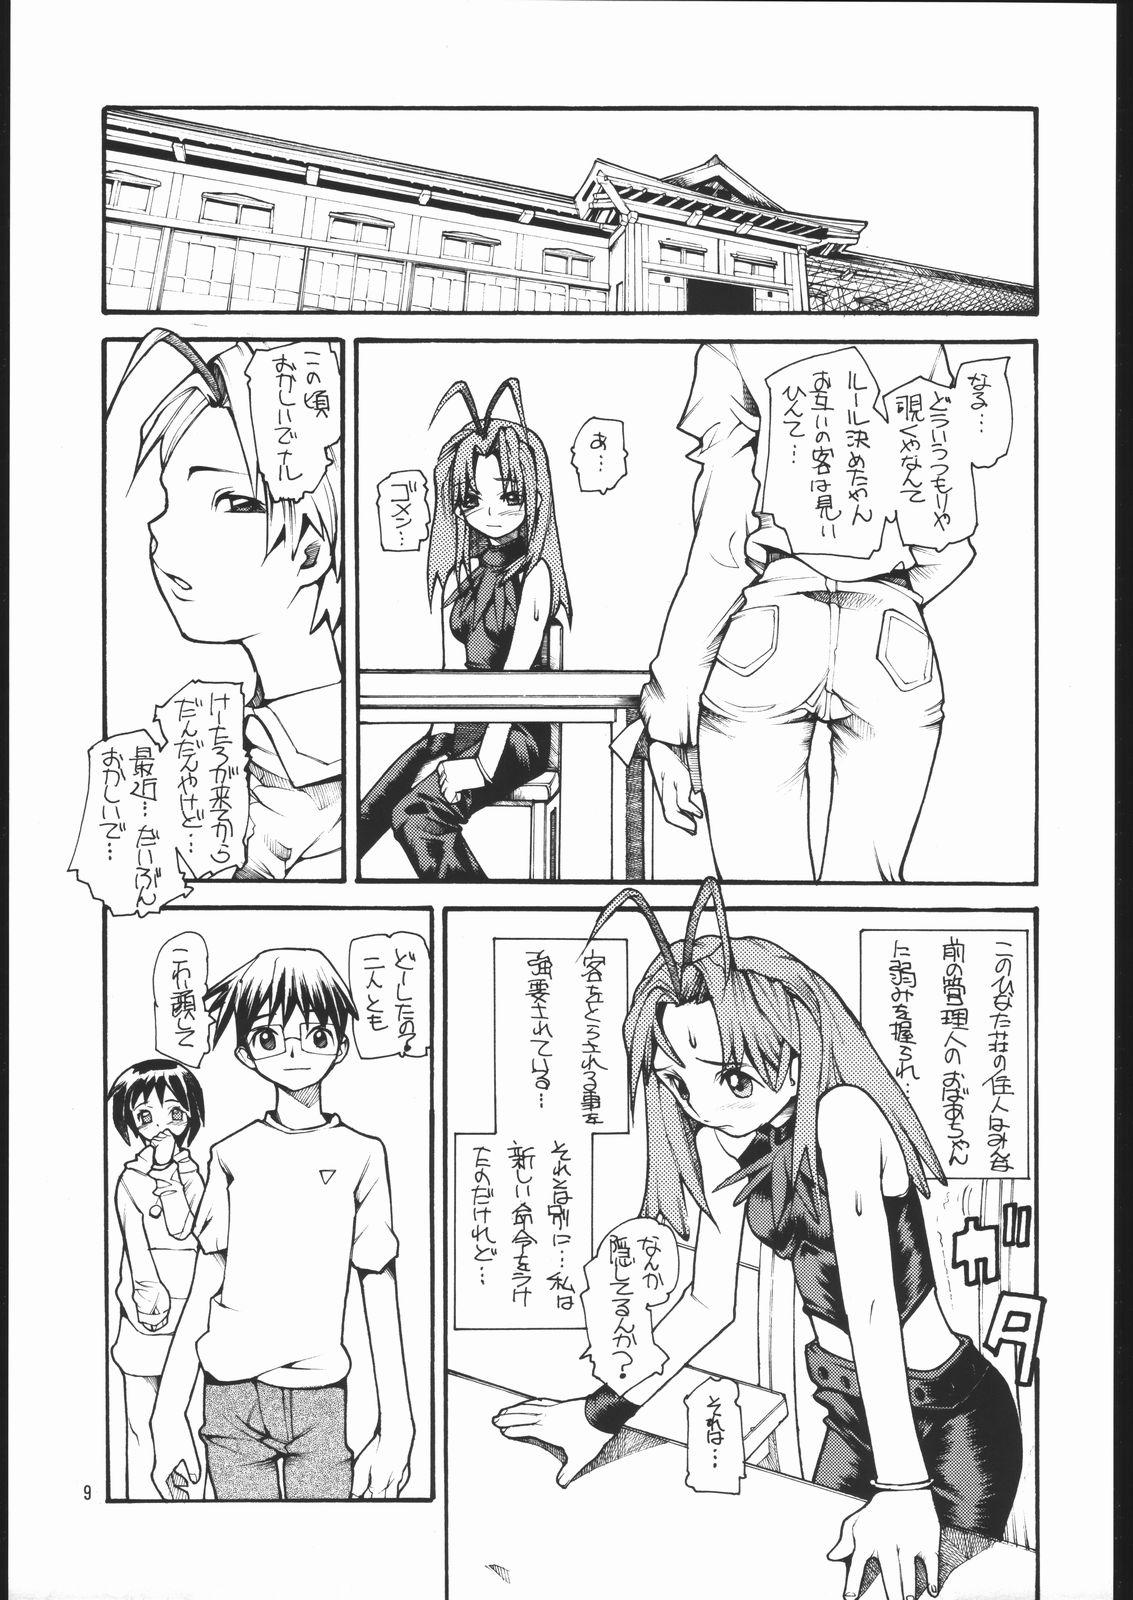 Maduro HR6 | Hyper Resturant 6 - Love hina Transsexual - Page 8